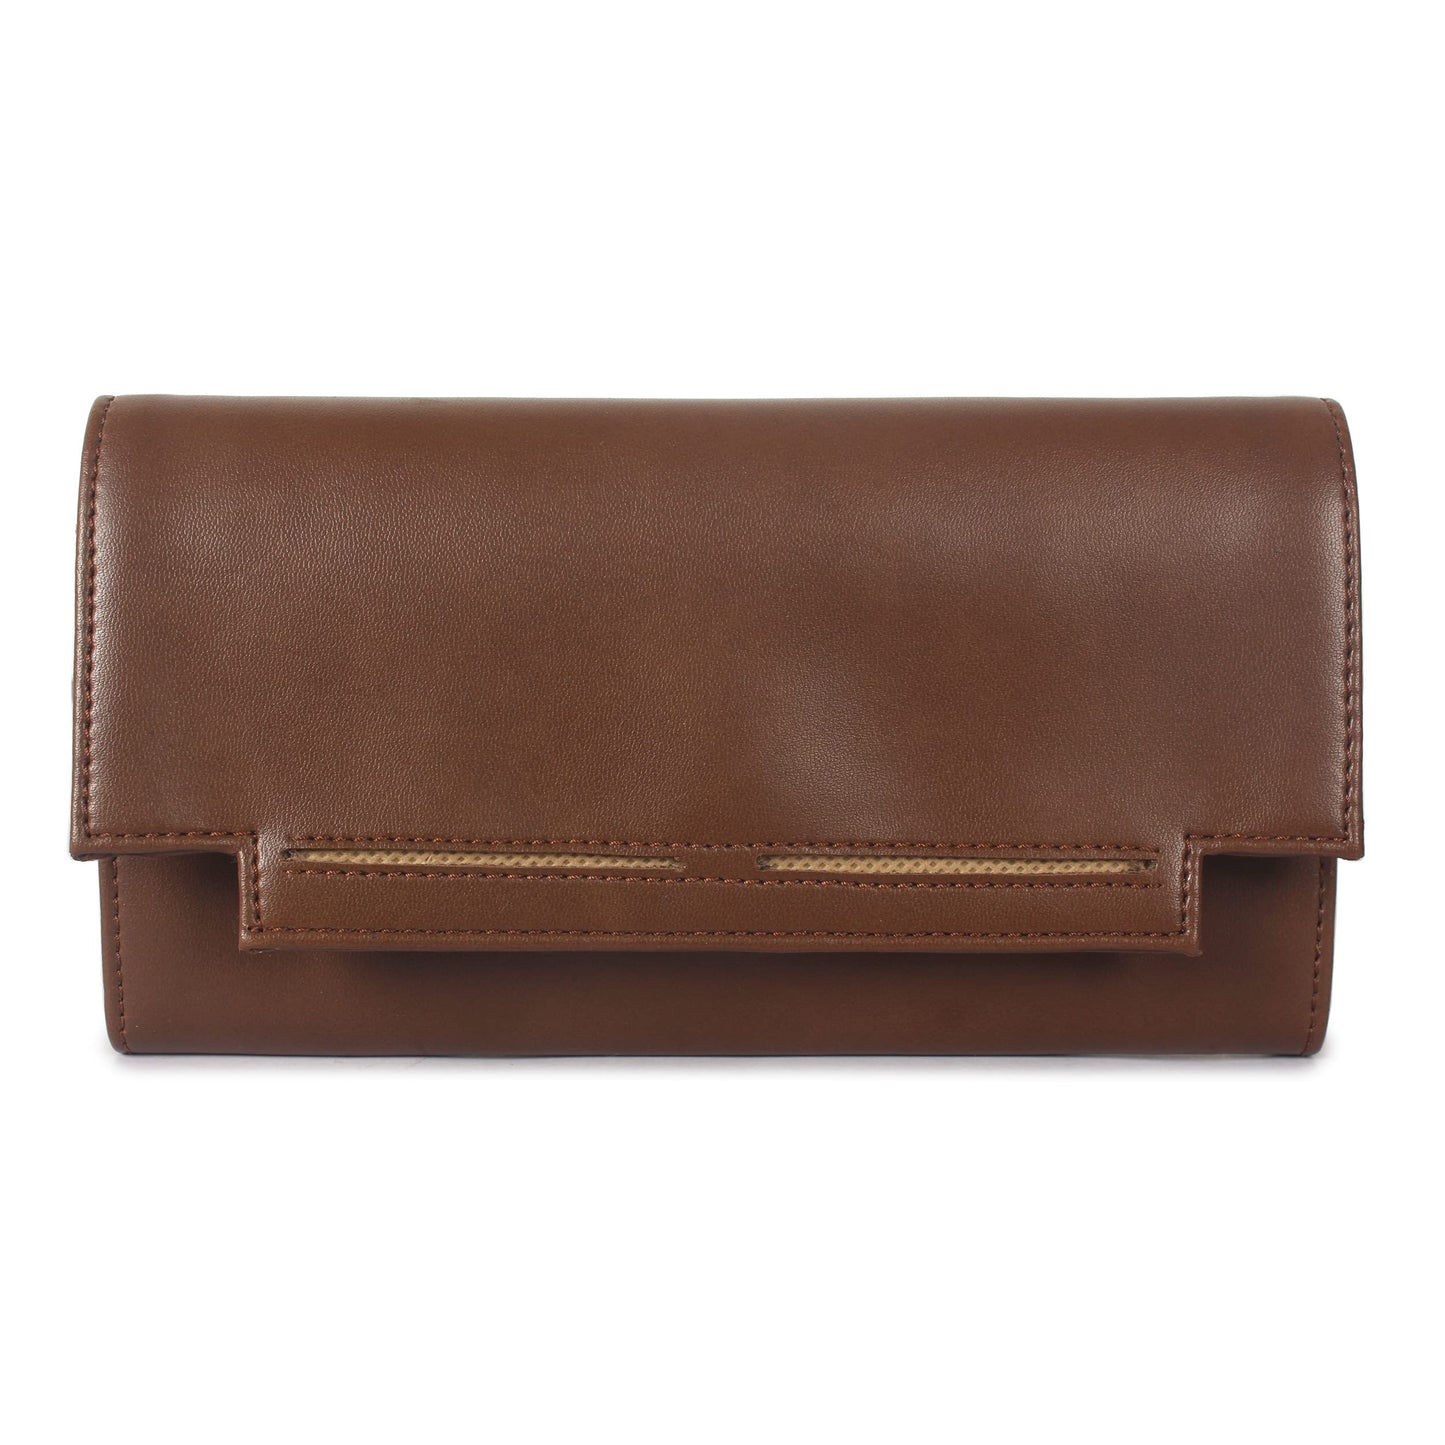 THE CLOWNFISH Laura Collection Womens Wallet Clutch Ladies Purse with multiple card slots (Brown)